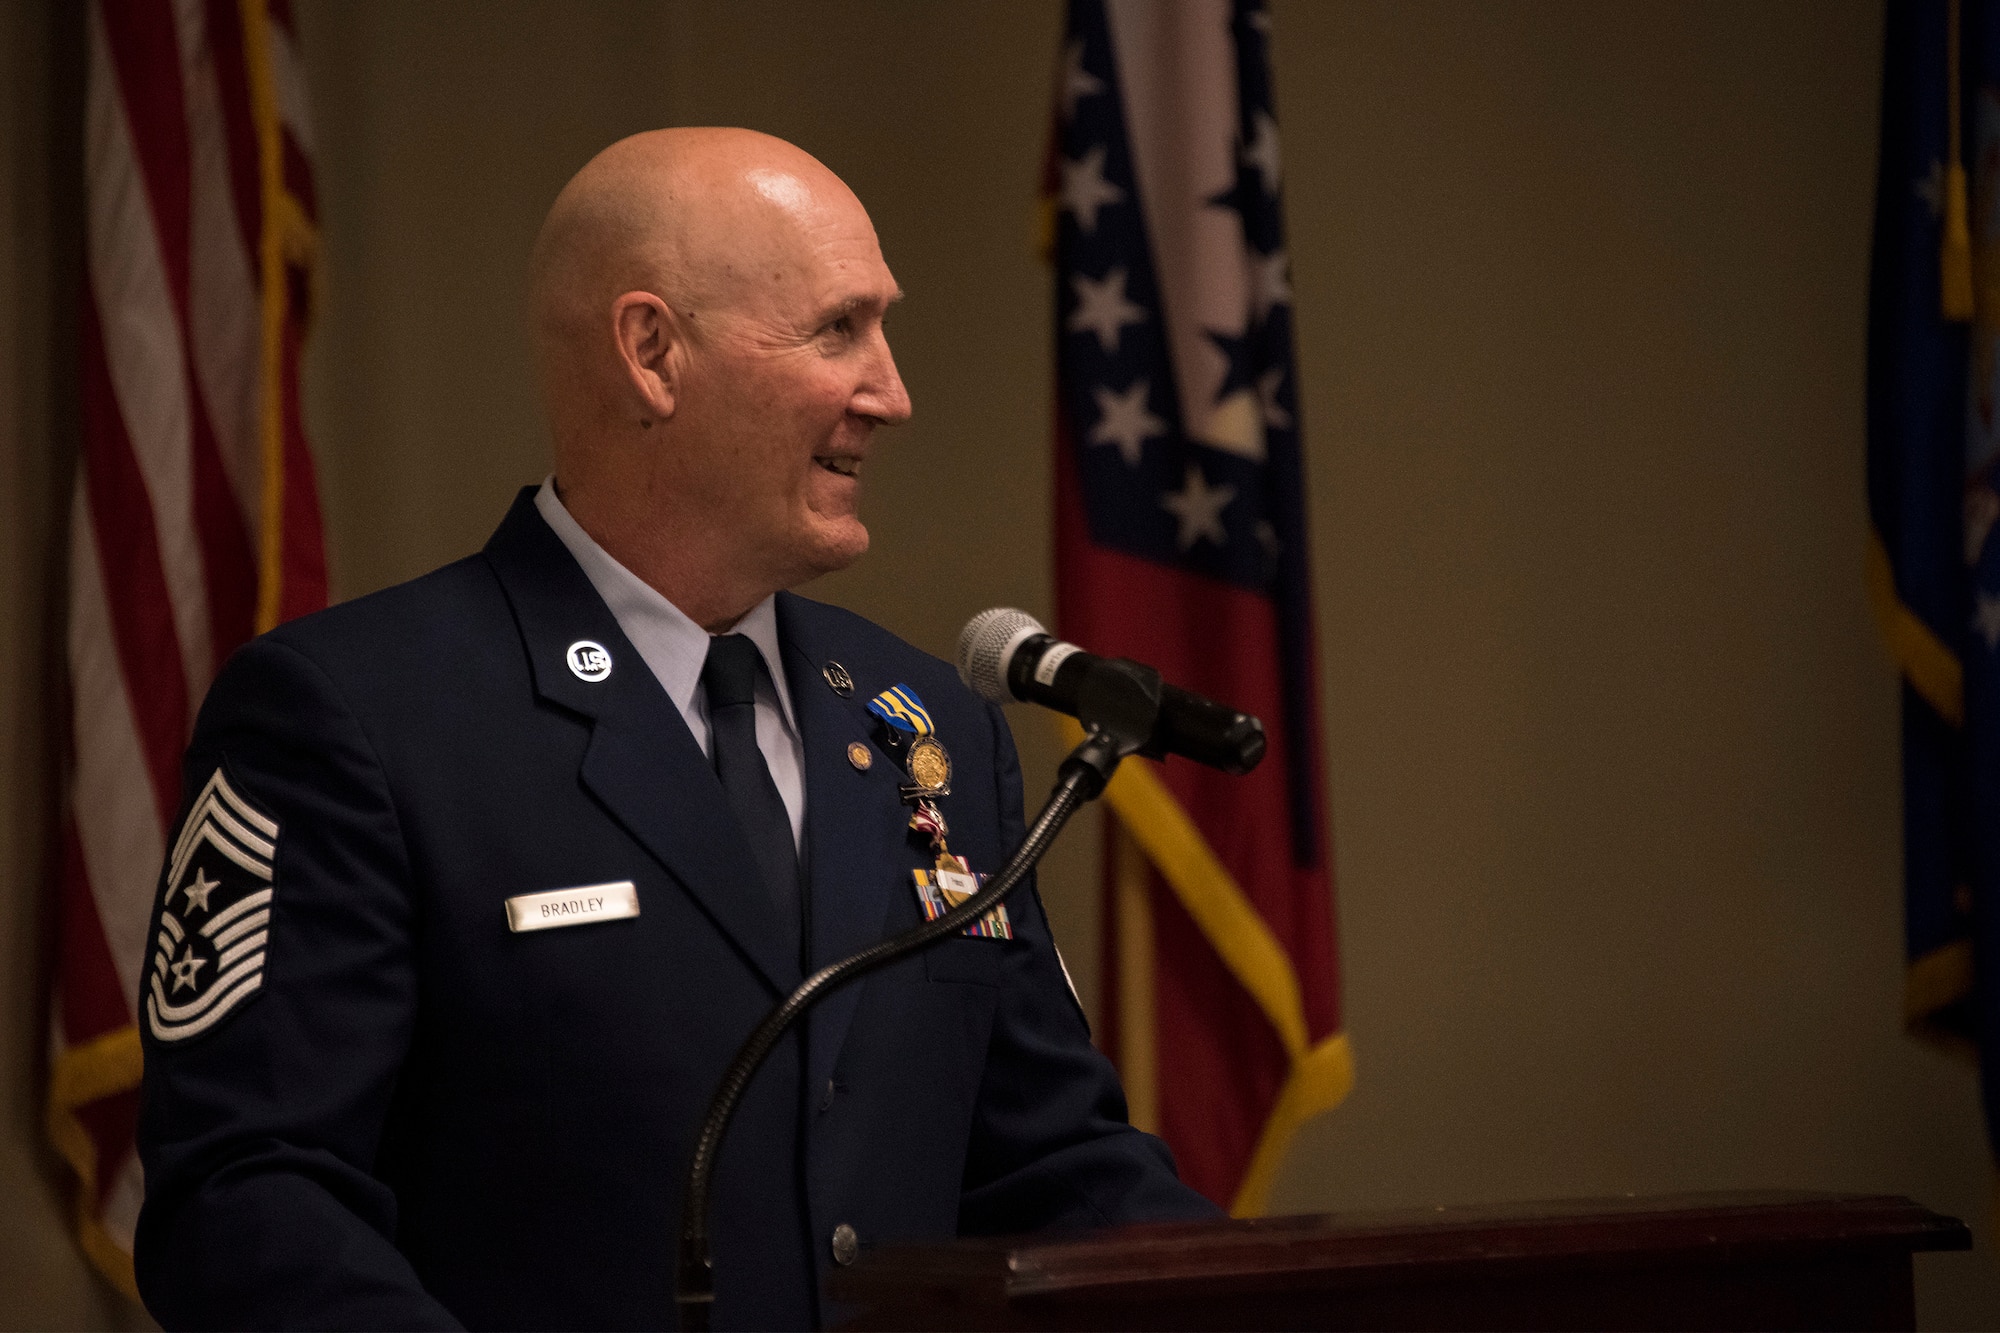 Chief Master Sgt. Stephen R. Bradley, 188th Wing command chief master sergeant, delivers remarks during a retirement ceremony held May 4, 2019, at Ebbing Air National Guard Base, Arkansas. Bradley served 37 years as a dental technician, first sergeant, and eventually 188th Wing command chief. (U.S. Air National Guard photo by Tech. Sgt. John E. Hillier)